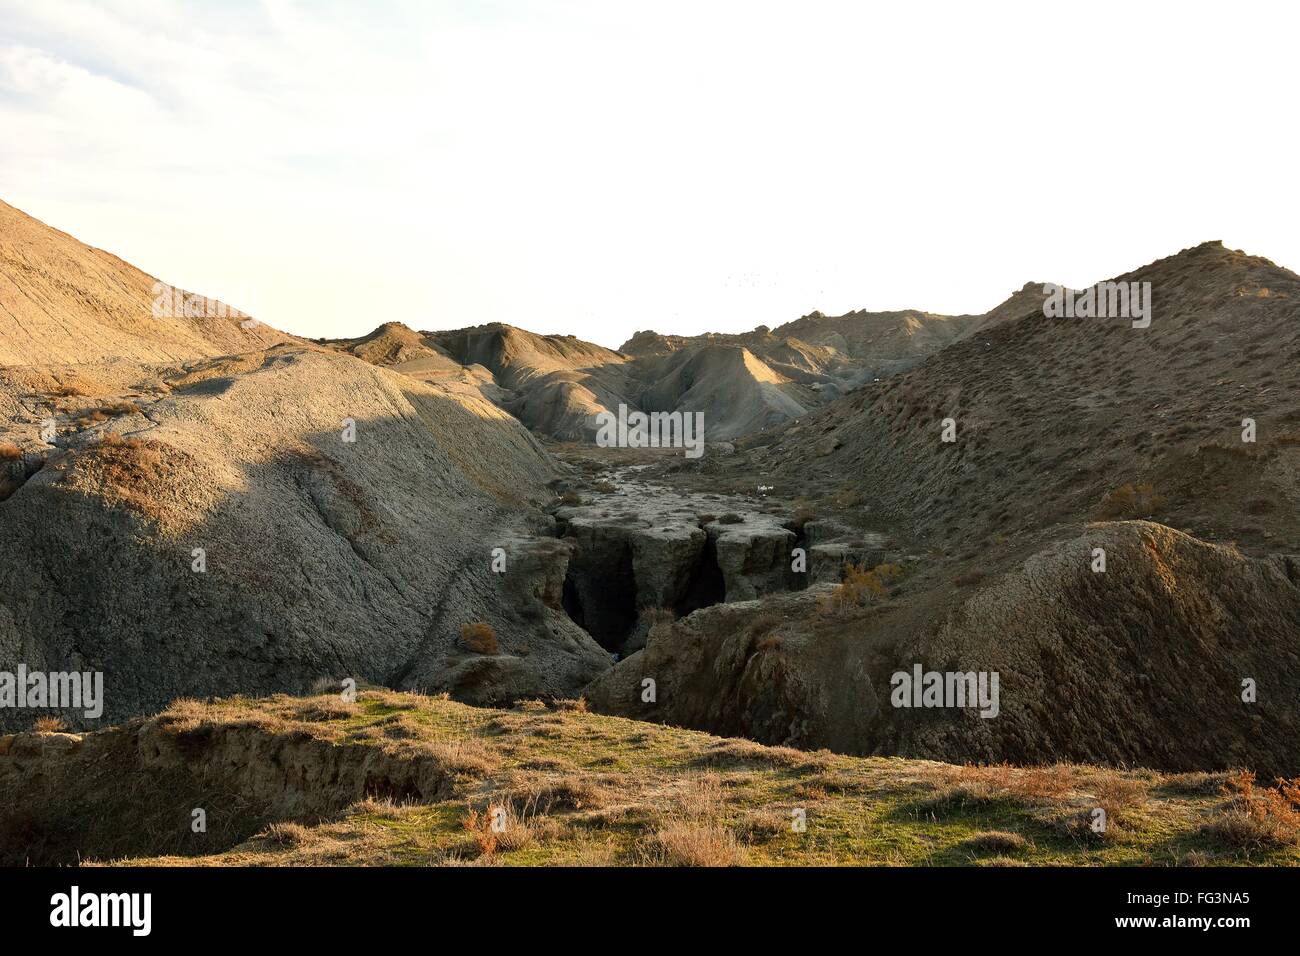 Channel eroded in mud in hills in Azerbaijan. Lokbatan is a small town 15km south west of Baku, with a mud volcano Stock Photo